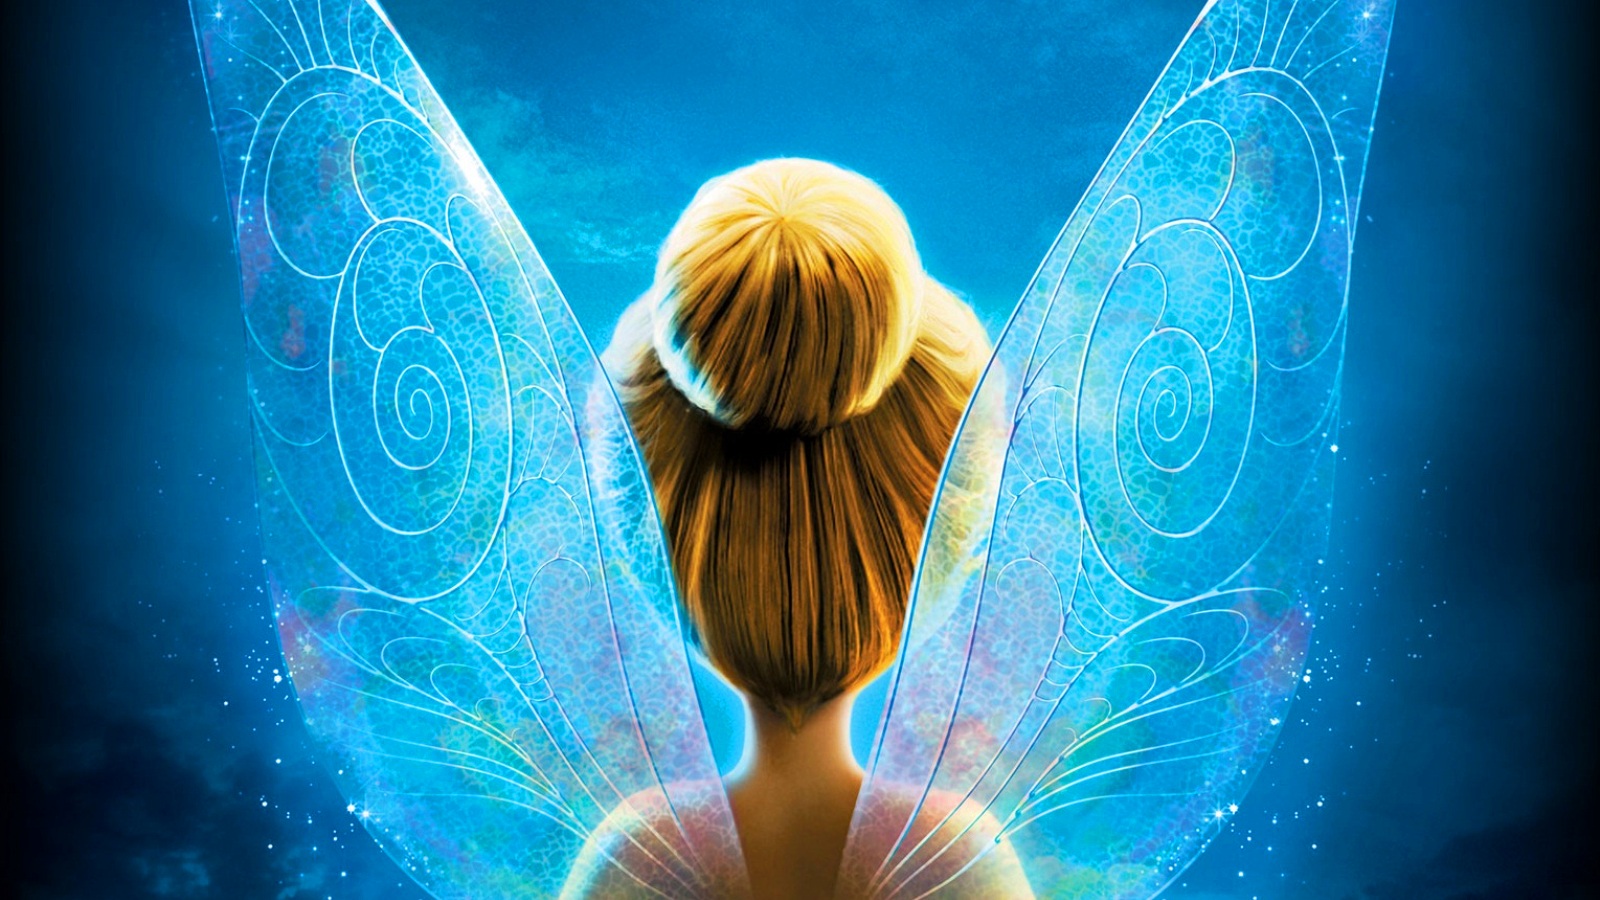 Tinkerbell Secret Of The Wings HD Wallpaper Animation